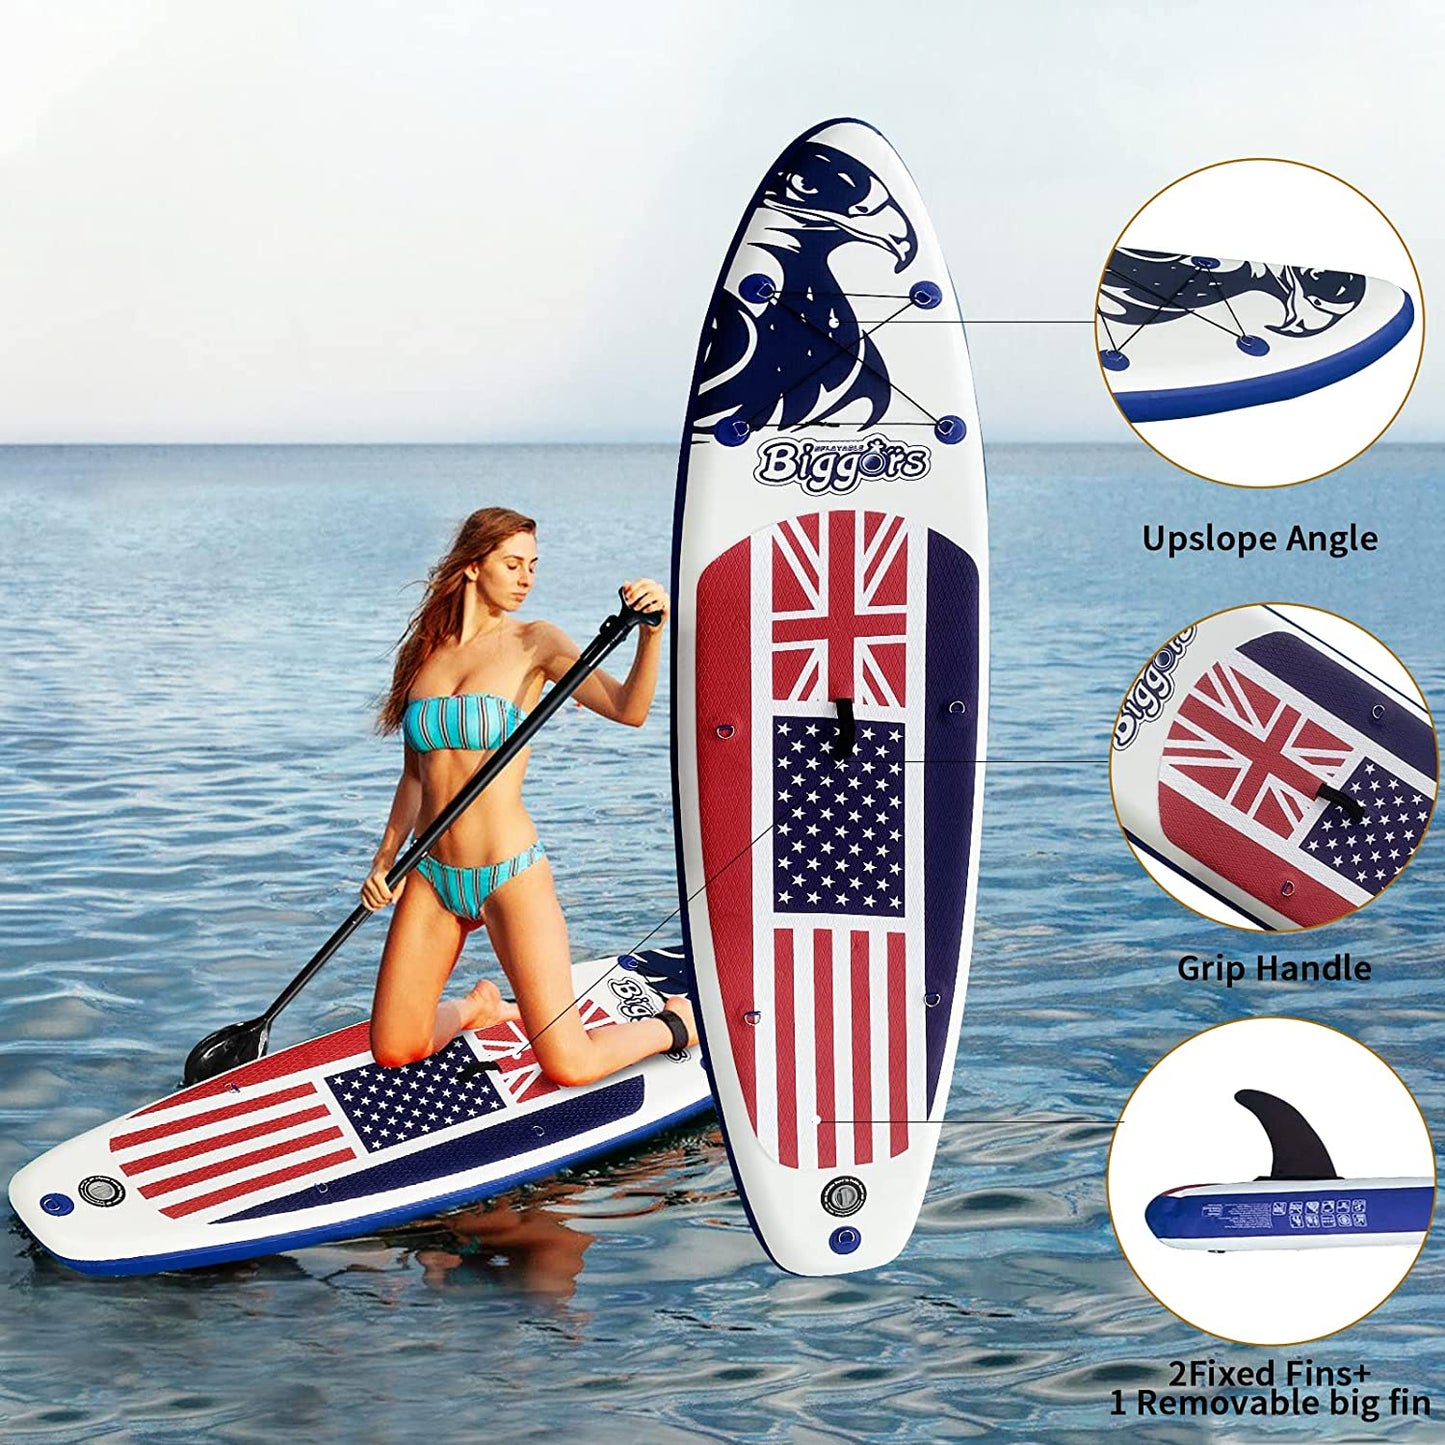 YARD Inflatable Stand Up Paddle Board with Pump for Sale